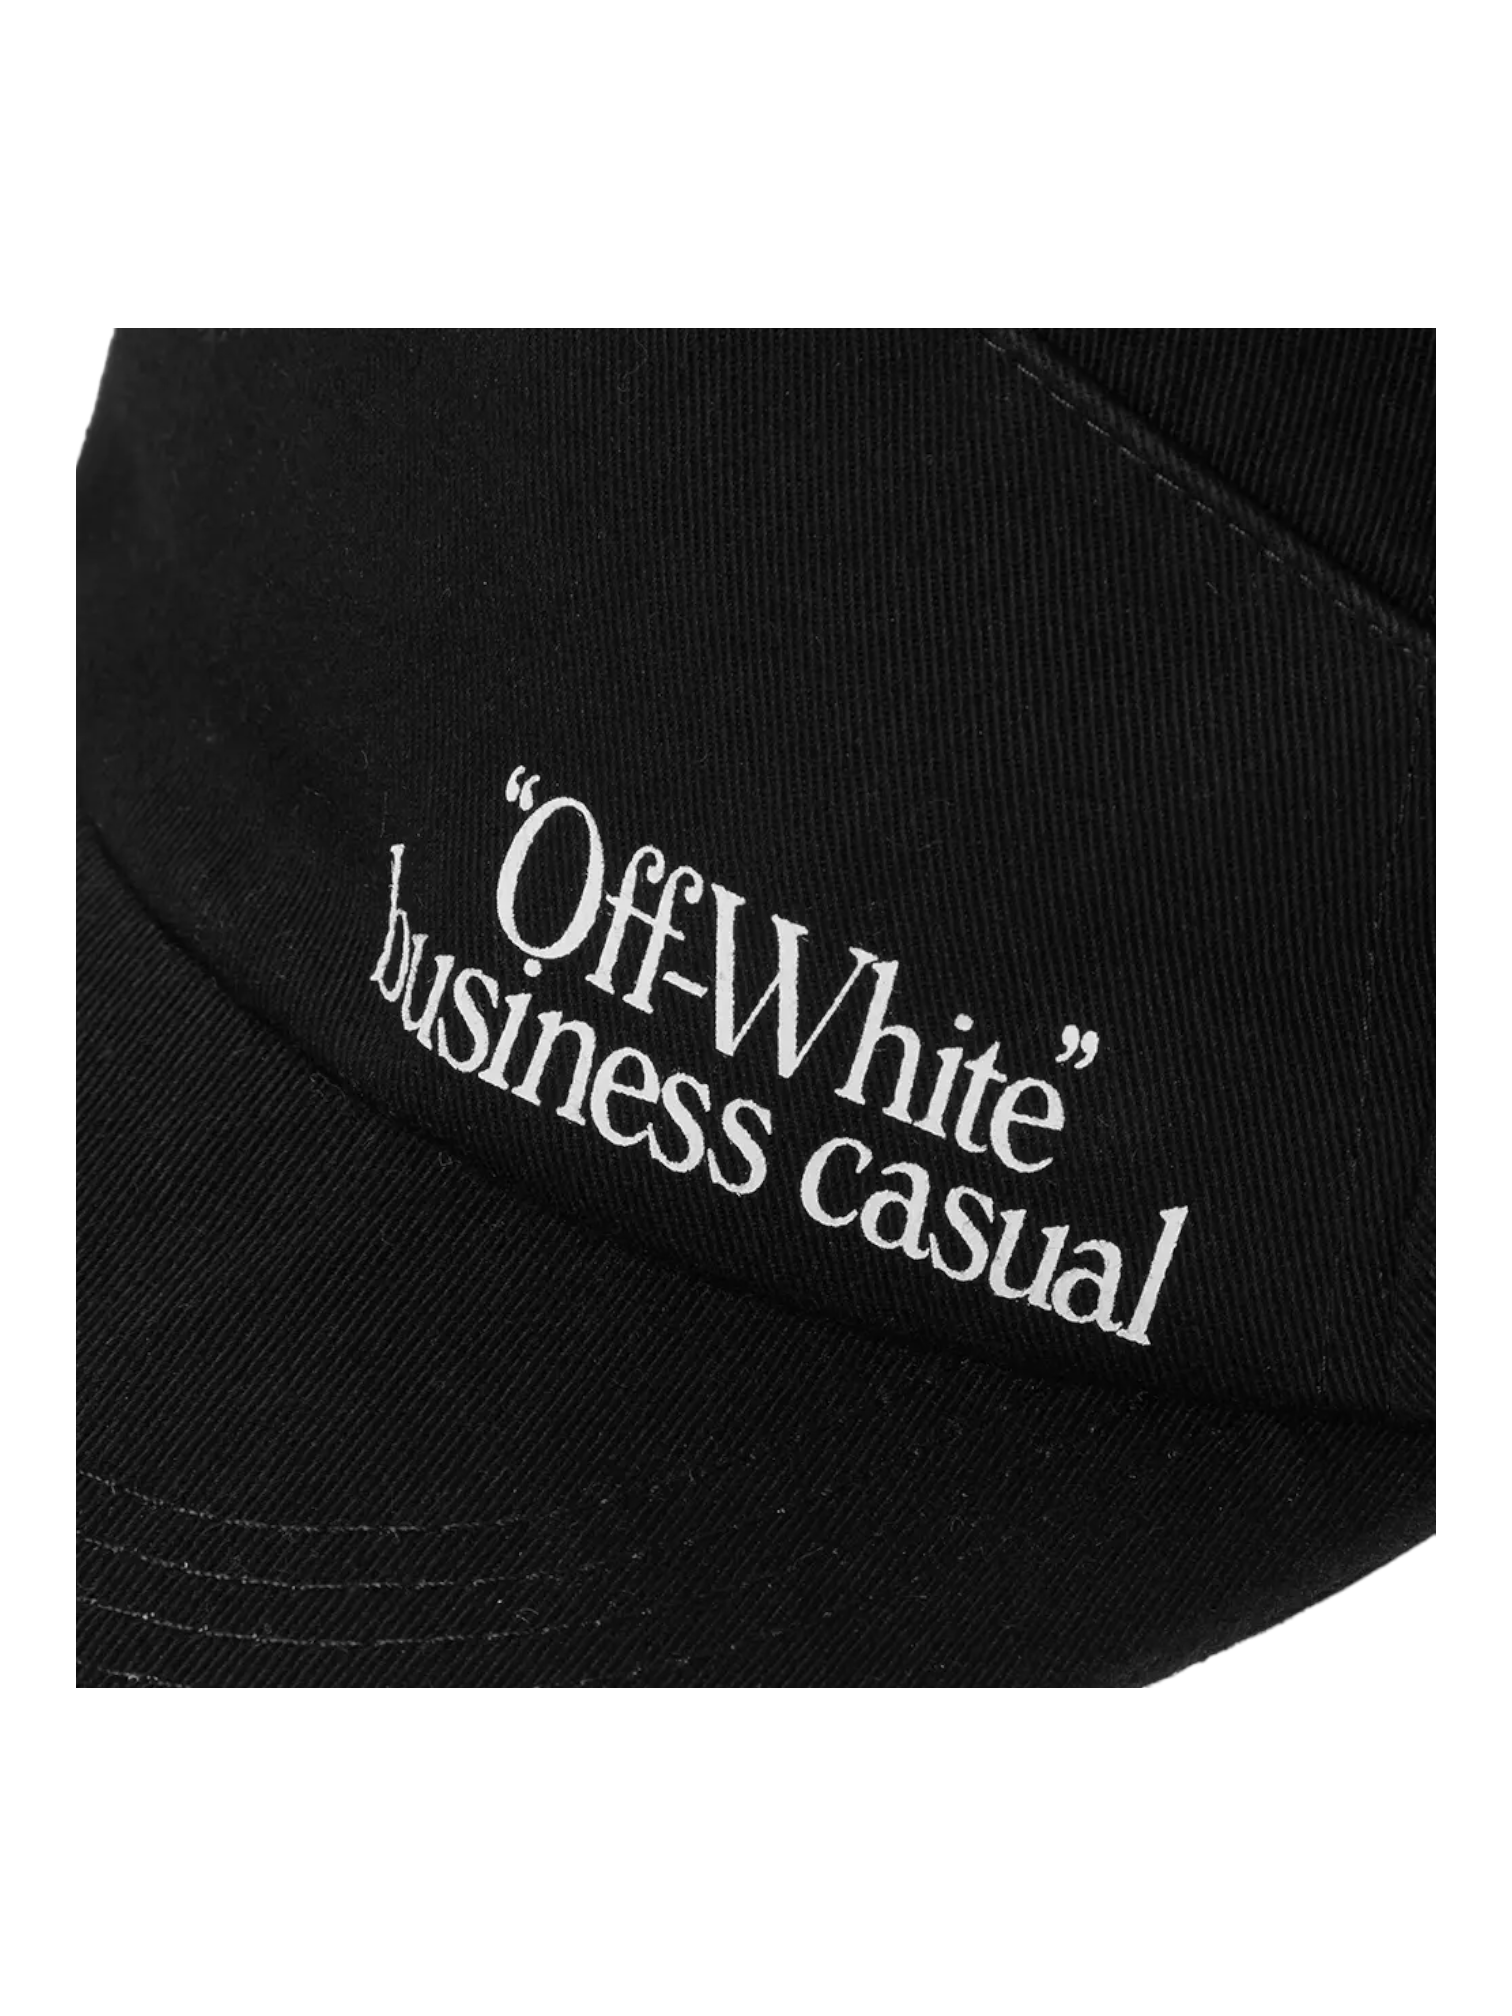 Off-White 5 Panel Business Casual Cap — Genuine Design Luxury Consignment for Men. New & Pre-Owned Clothing, Shoes, & Accessories. Calgary, Canada